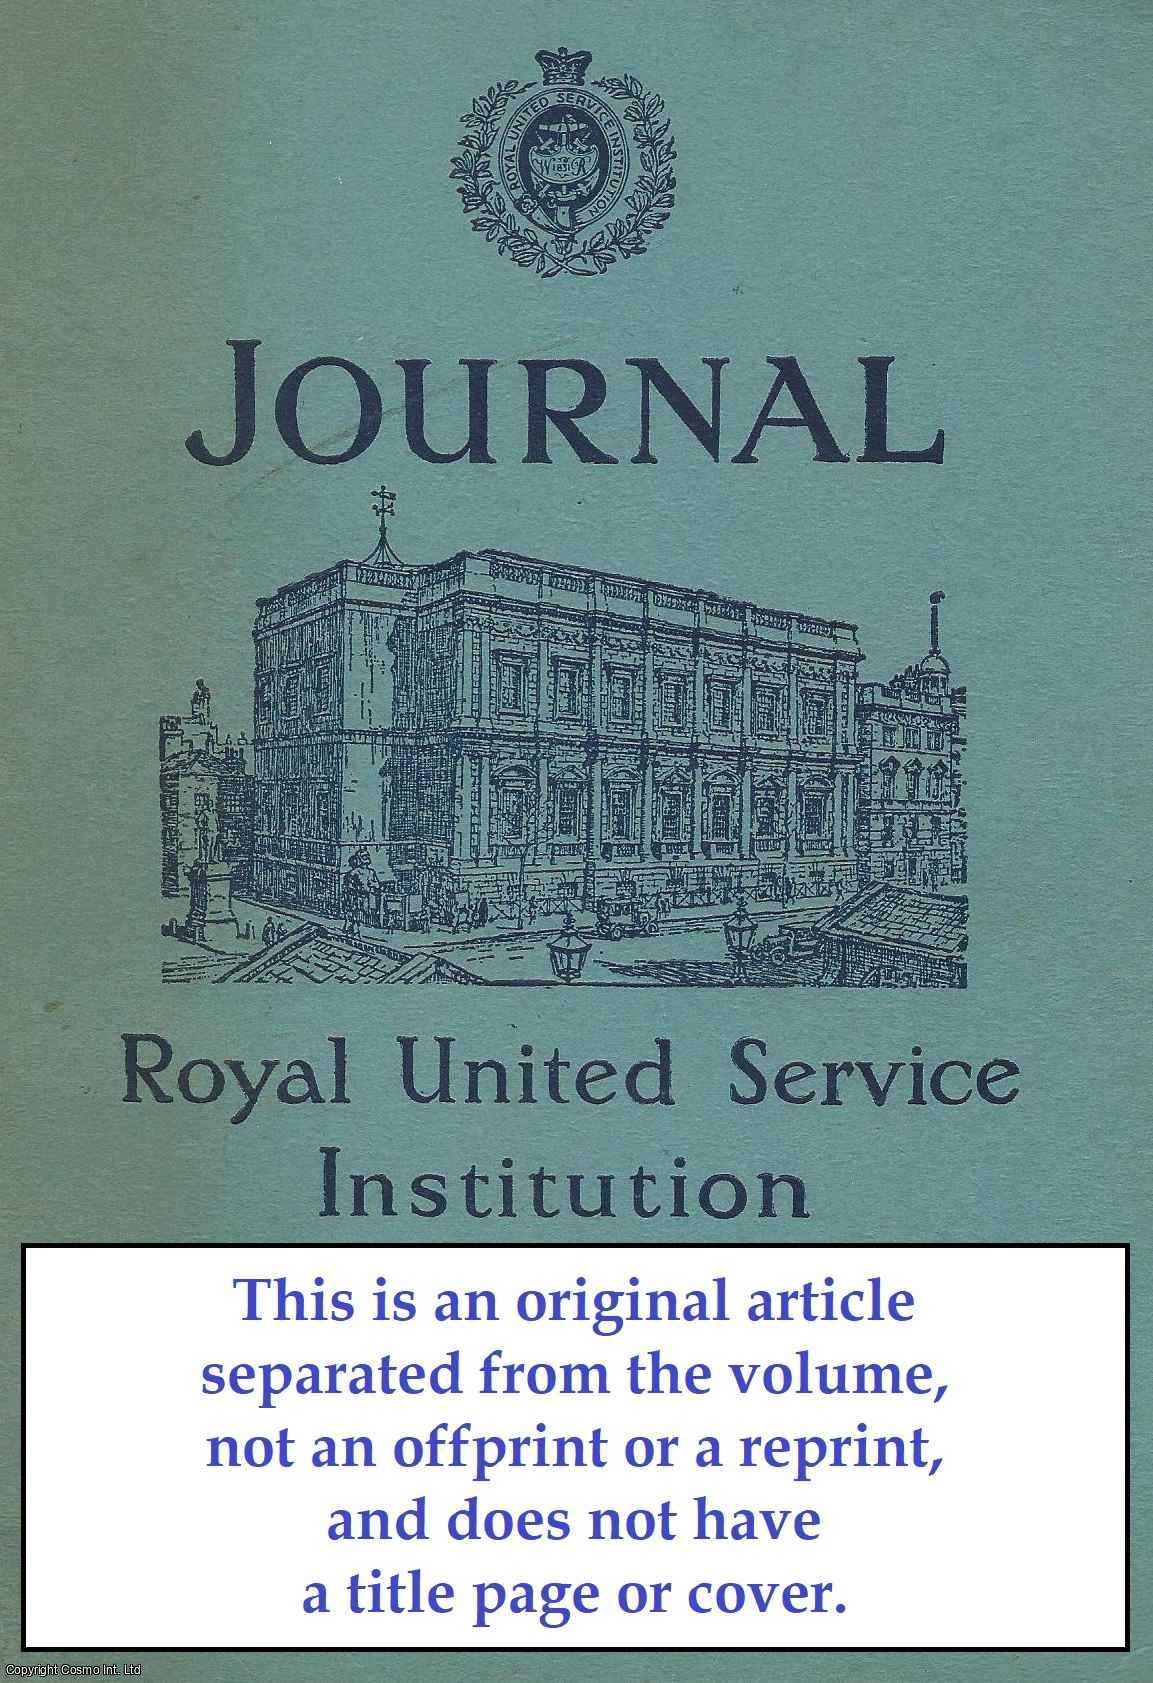 M. E. S. Laws - Mission to Russia, 1799. An original article from Journal of The Royal United Service Institution, 1956.